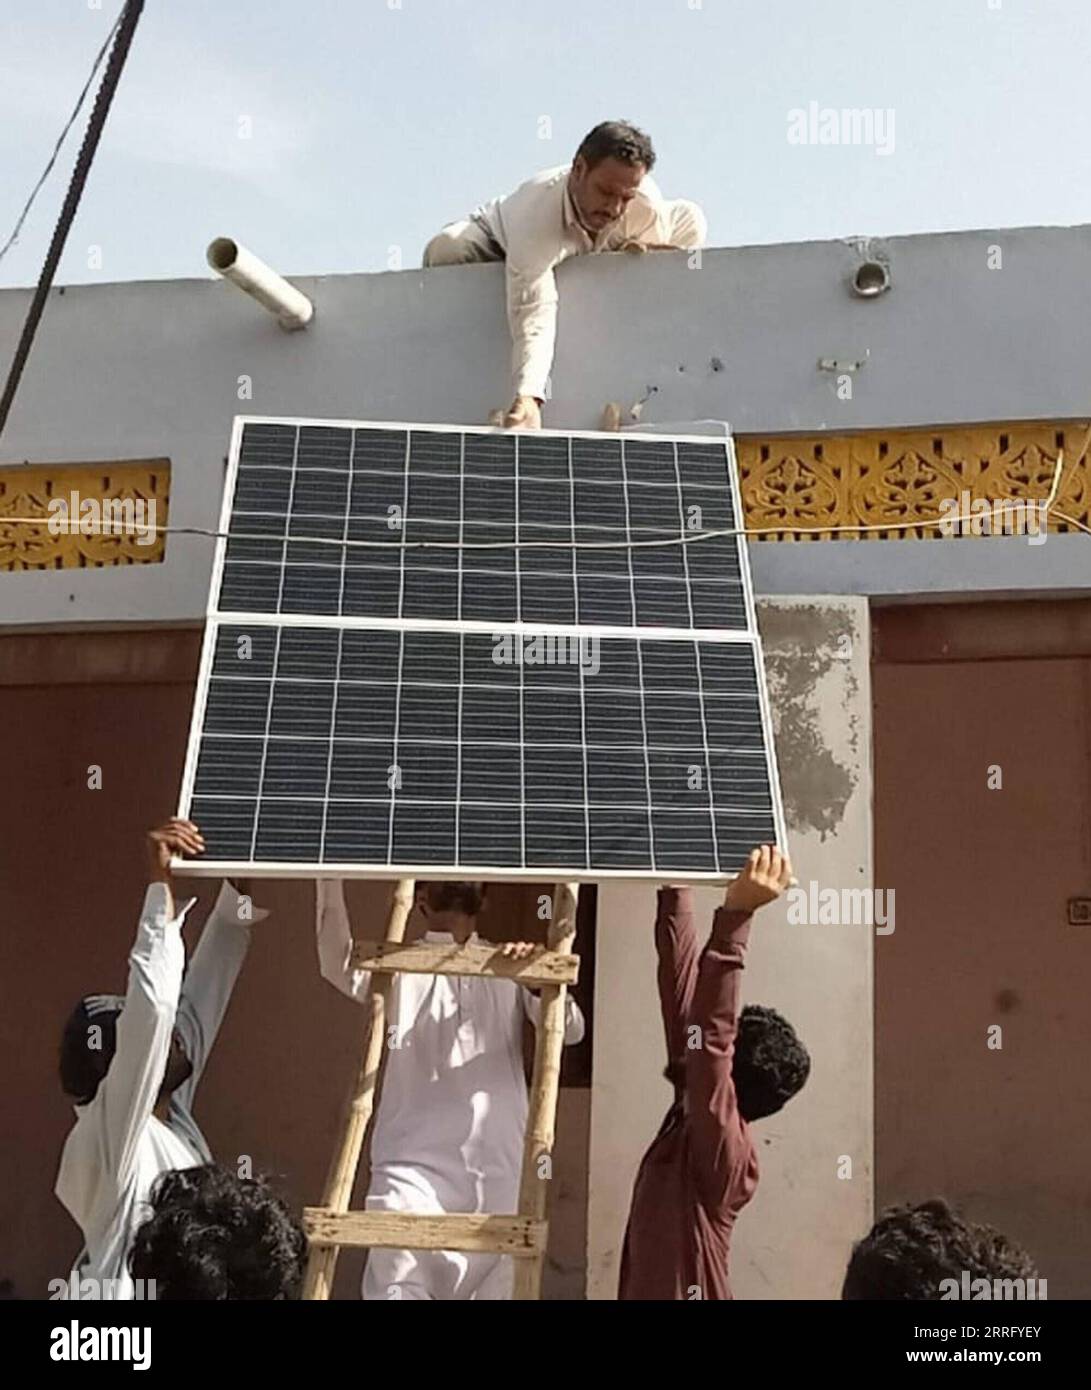 220430 -- GWADAR, April 30, 2022 -- Workers install a China-donated solar panel at a house in Gwadar, Pakistan, March 14, 2022. TO GO WITH Feature: Chinese aid illuminates houses, helps fishermen in Pakistan s Gwadar Str/Xinhua PAKISTAN-GWADAR-CHINA-AID-SOLAR SYSTEM Stringer PUBLICATIONxNOTxINxCHN Stock Photo